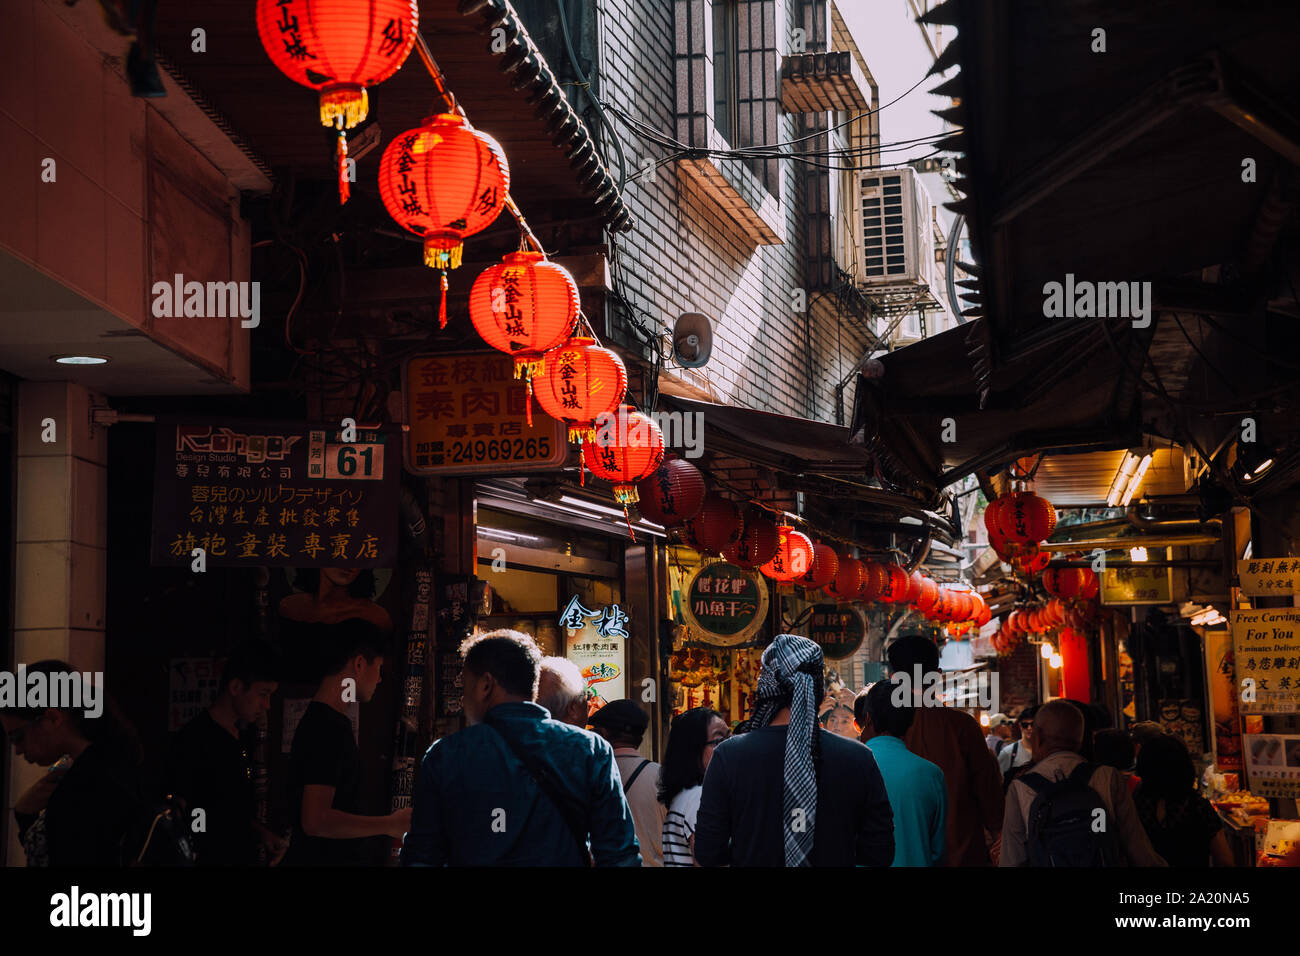 Jiufen, Taiwan - November 07, 2018: People walk with purchases along the crowded Old Street market on November 7, 2018, in Jiufen, Taiwan Stock Photo